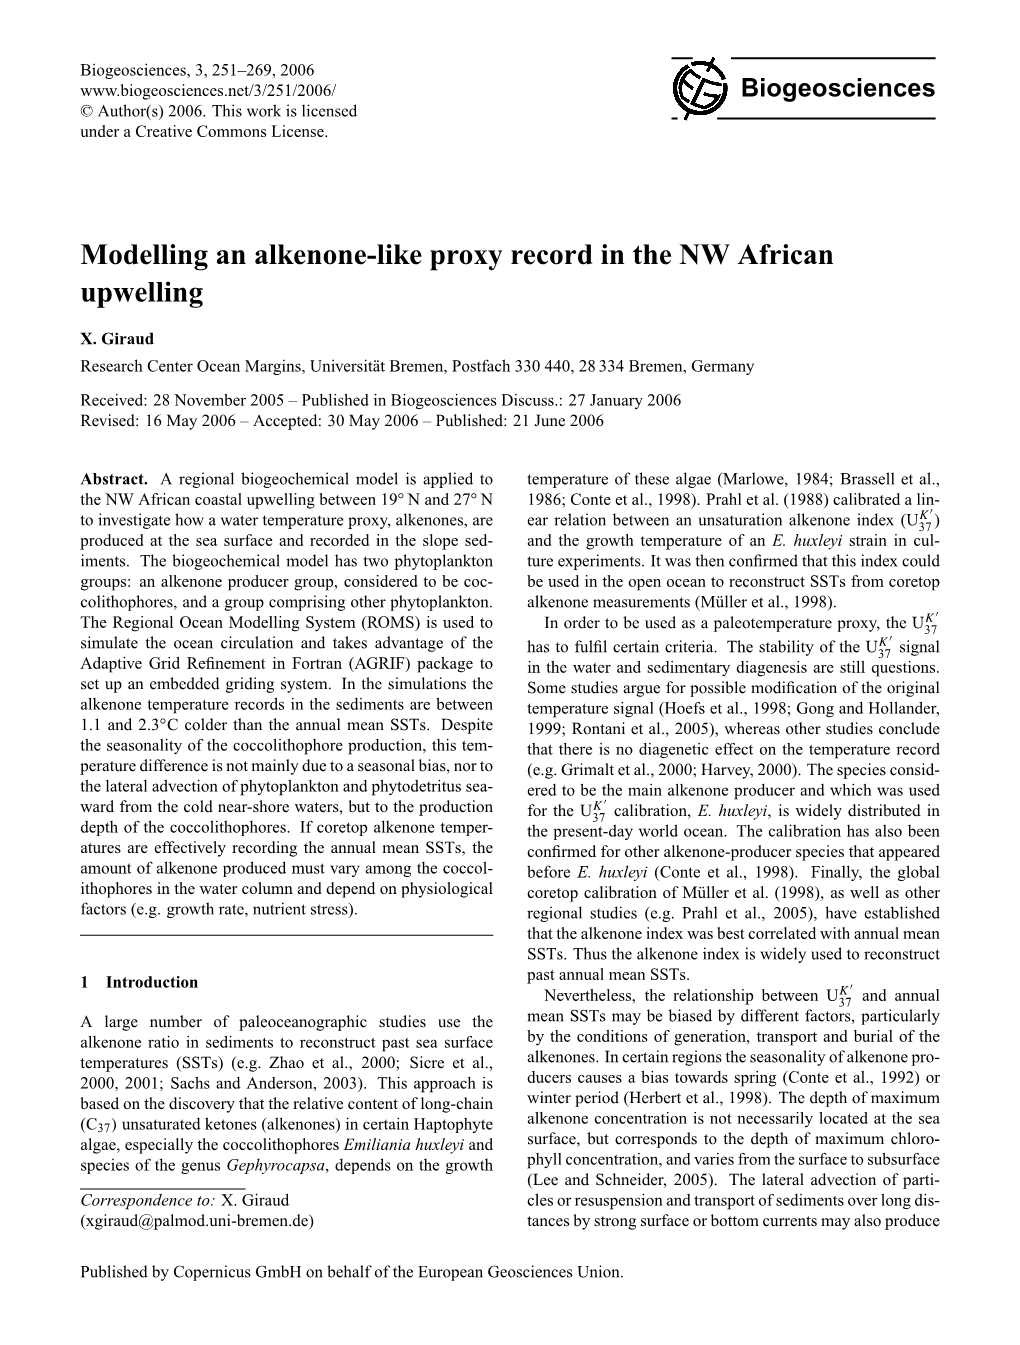 Modelling an Alkenone-Like Proxy Record in the NW African Upwelling